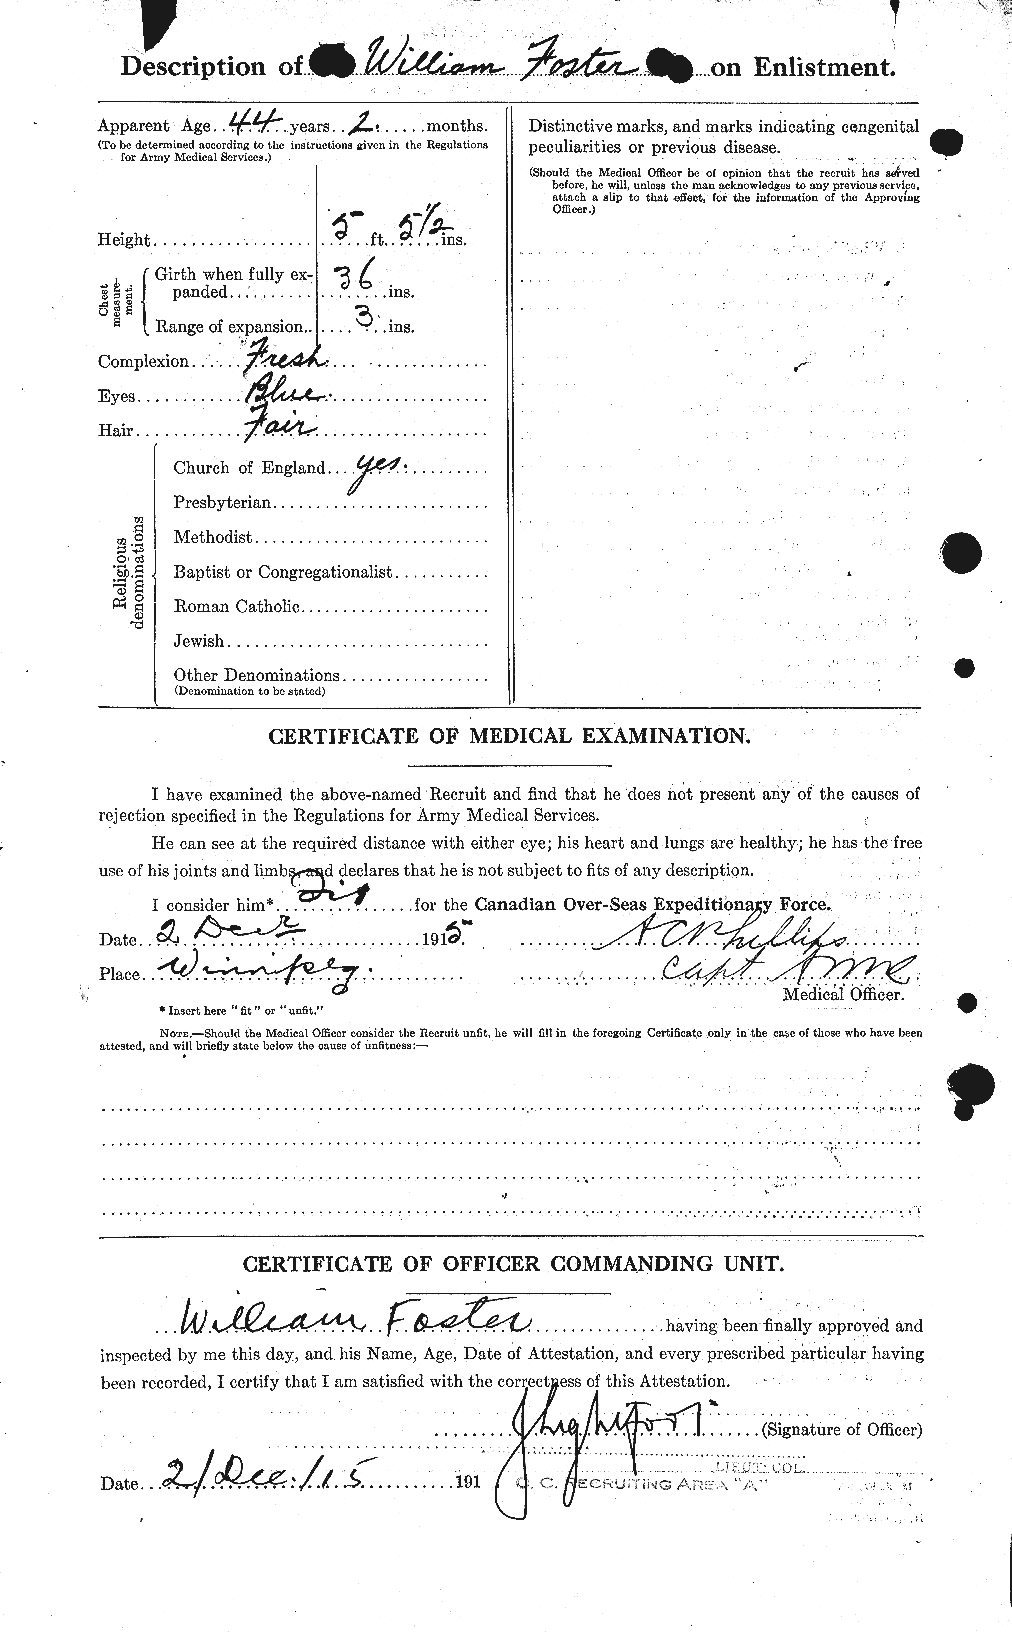 Personnel Records of the First World War - CEF 328709b